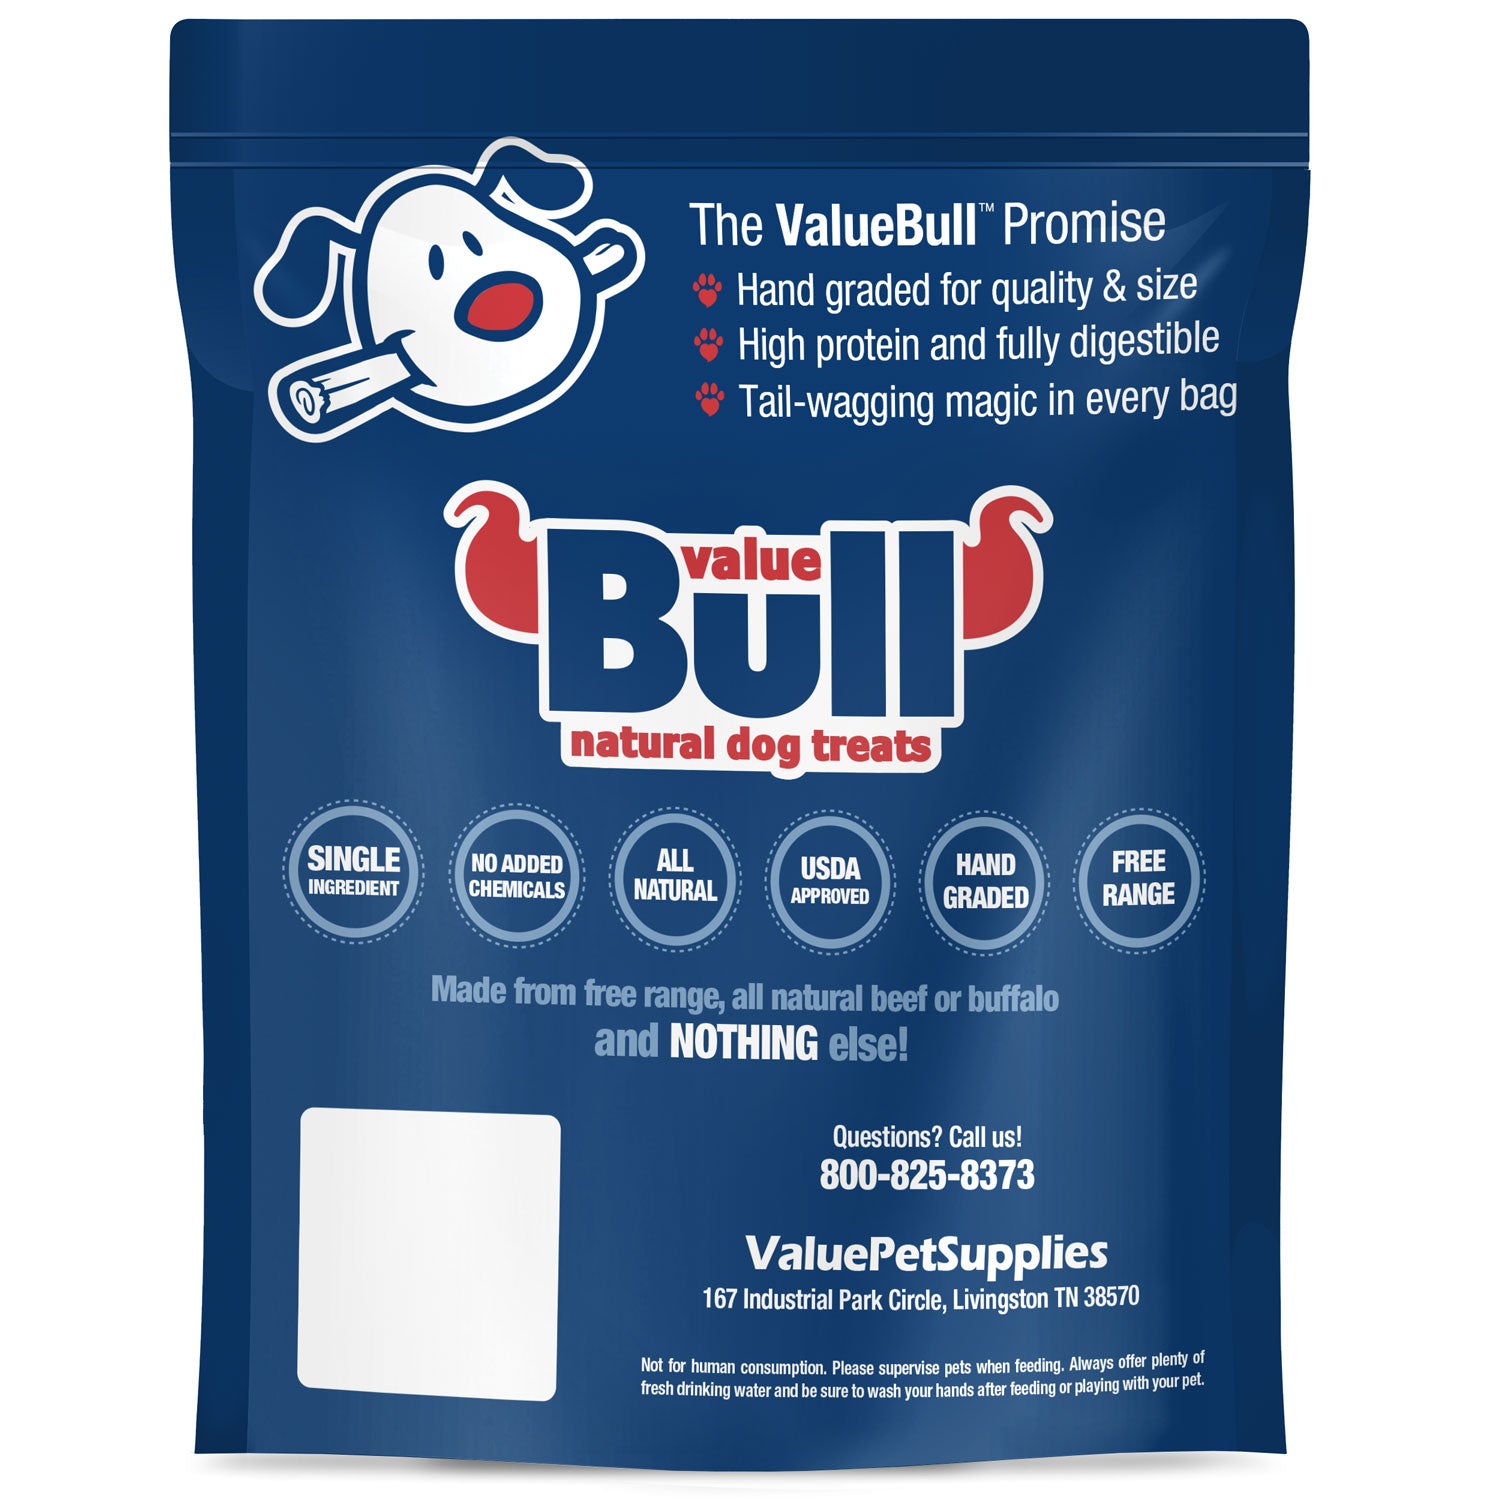 ValueBull Bully Sticks for Dogs, Thick 12 Inch, 100 Count